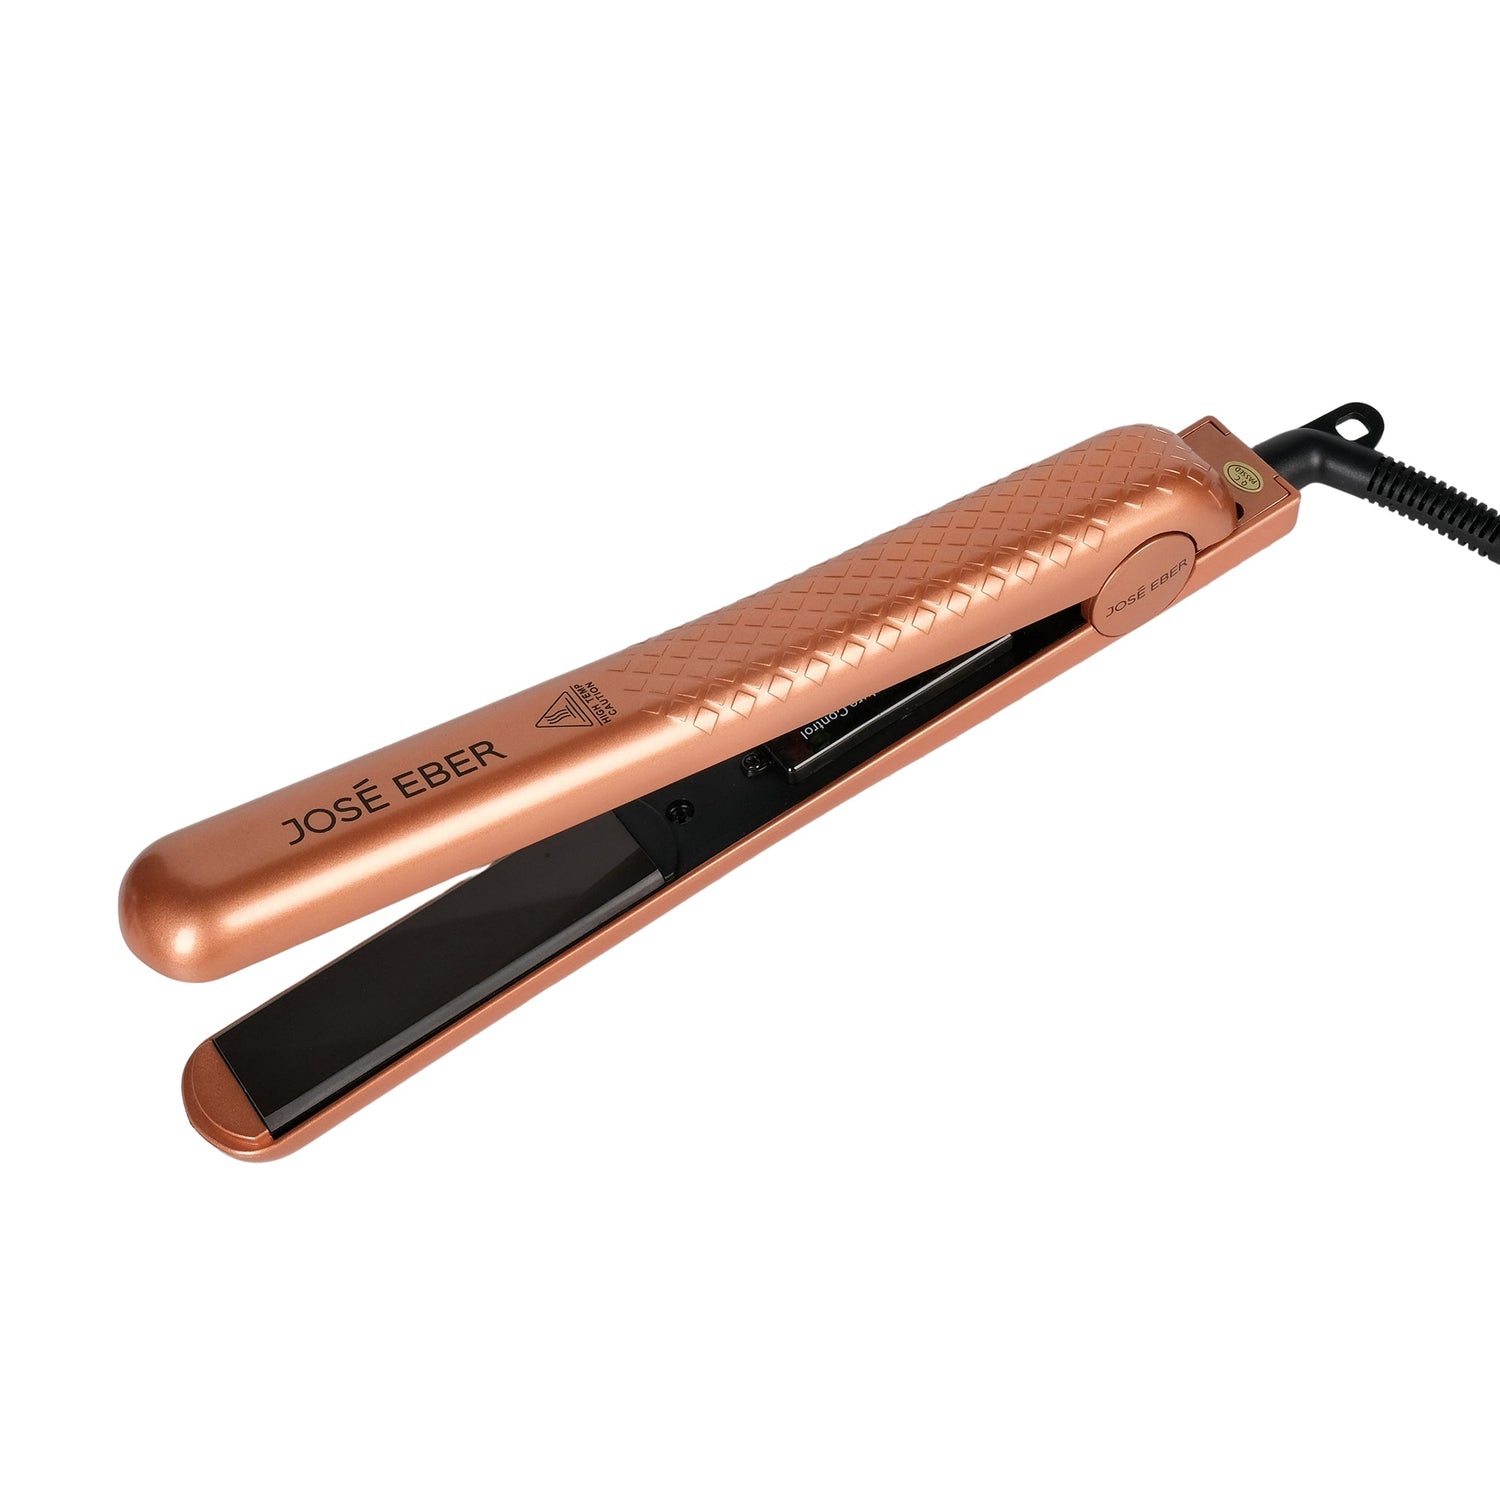 Jose Eber Pure Ceramic Flat Iron - Premium Hair Straightener for Salon Quality Results - Gold - Couture Hair Pro